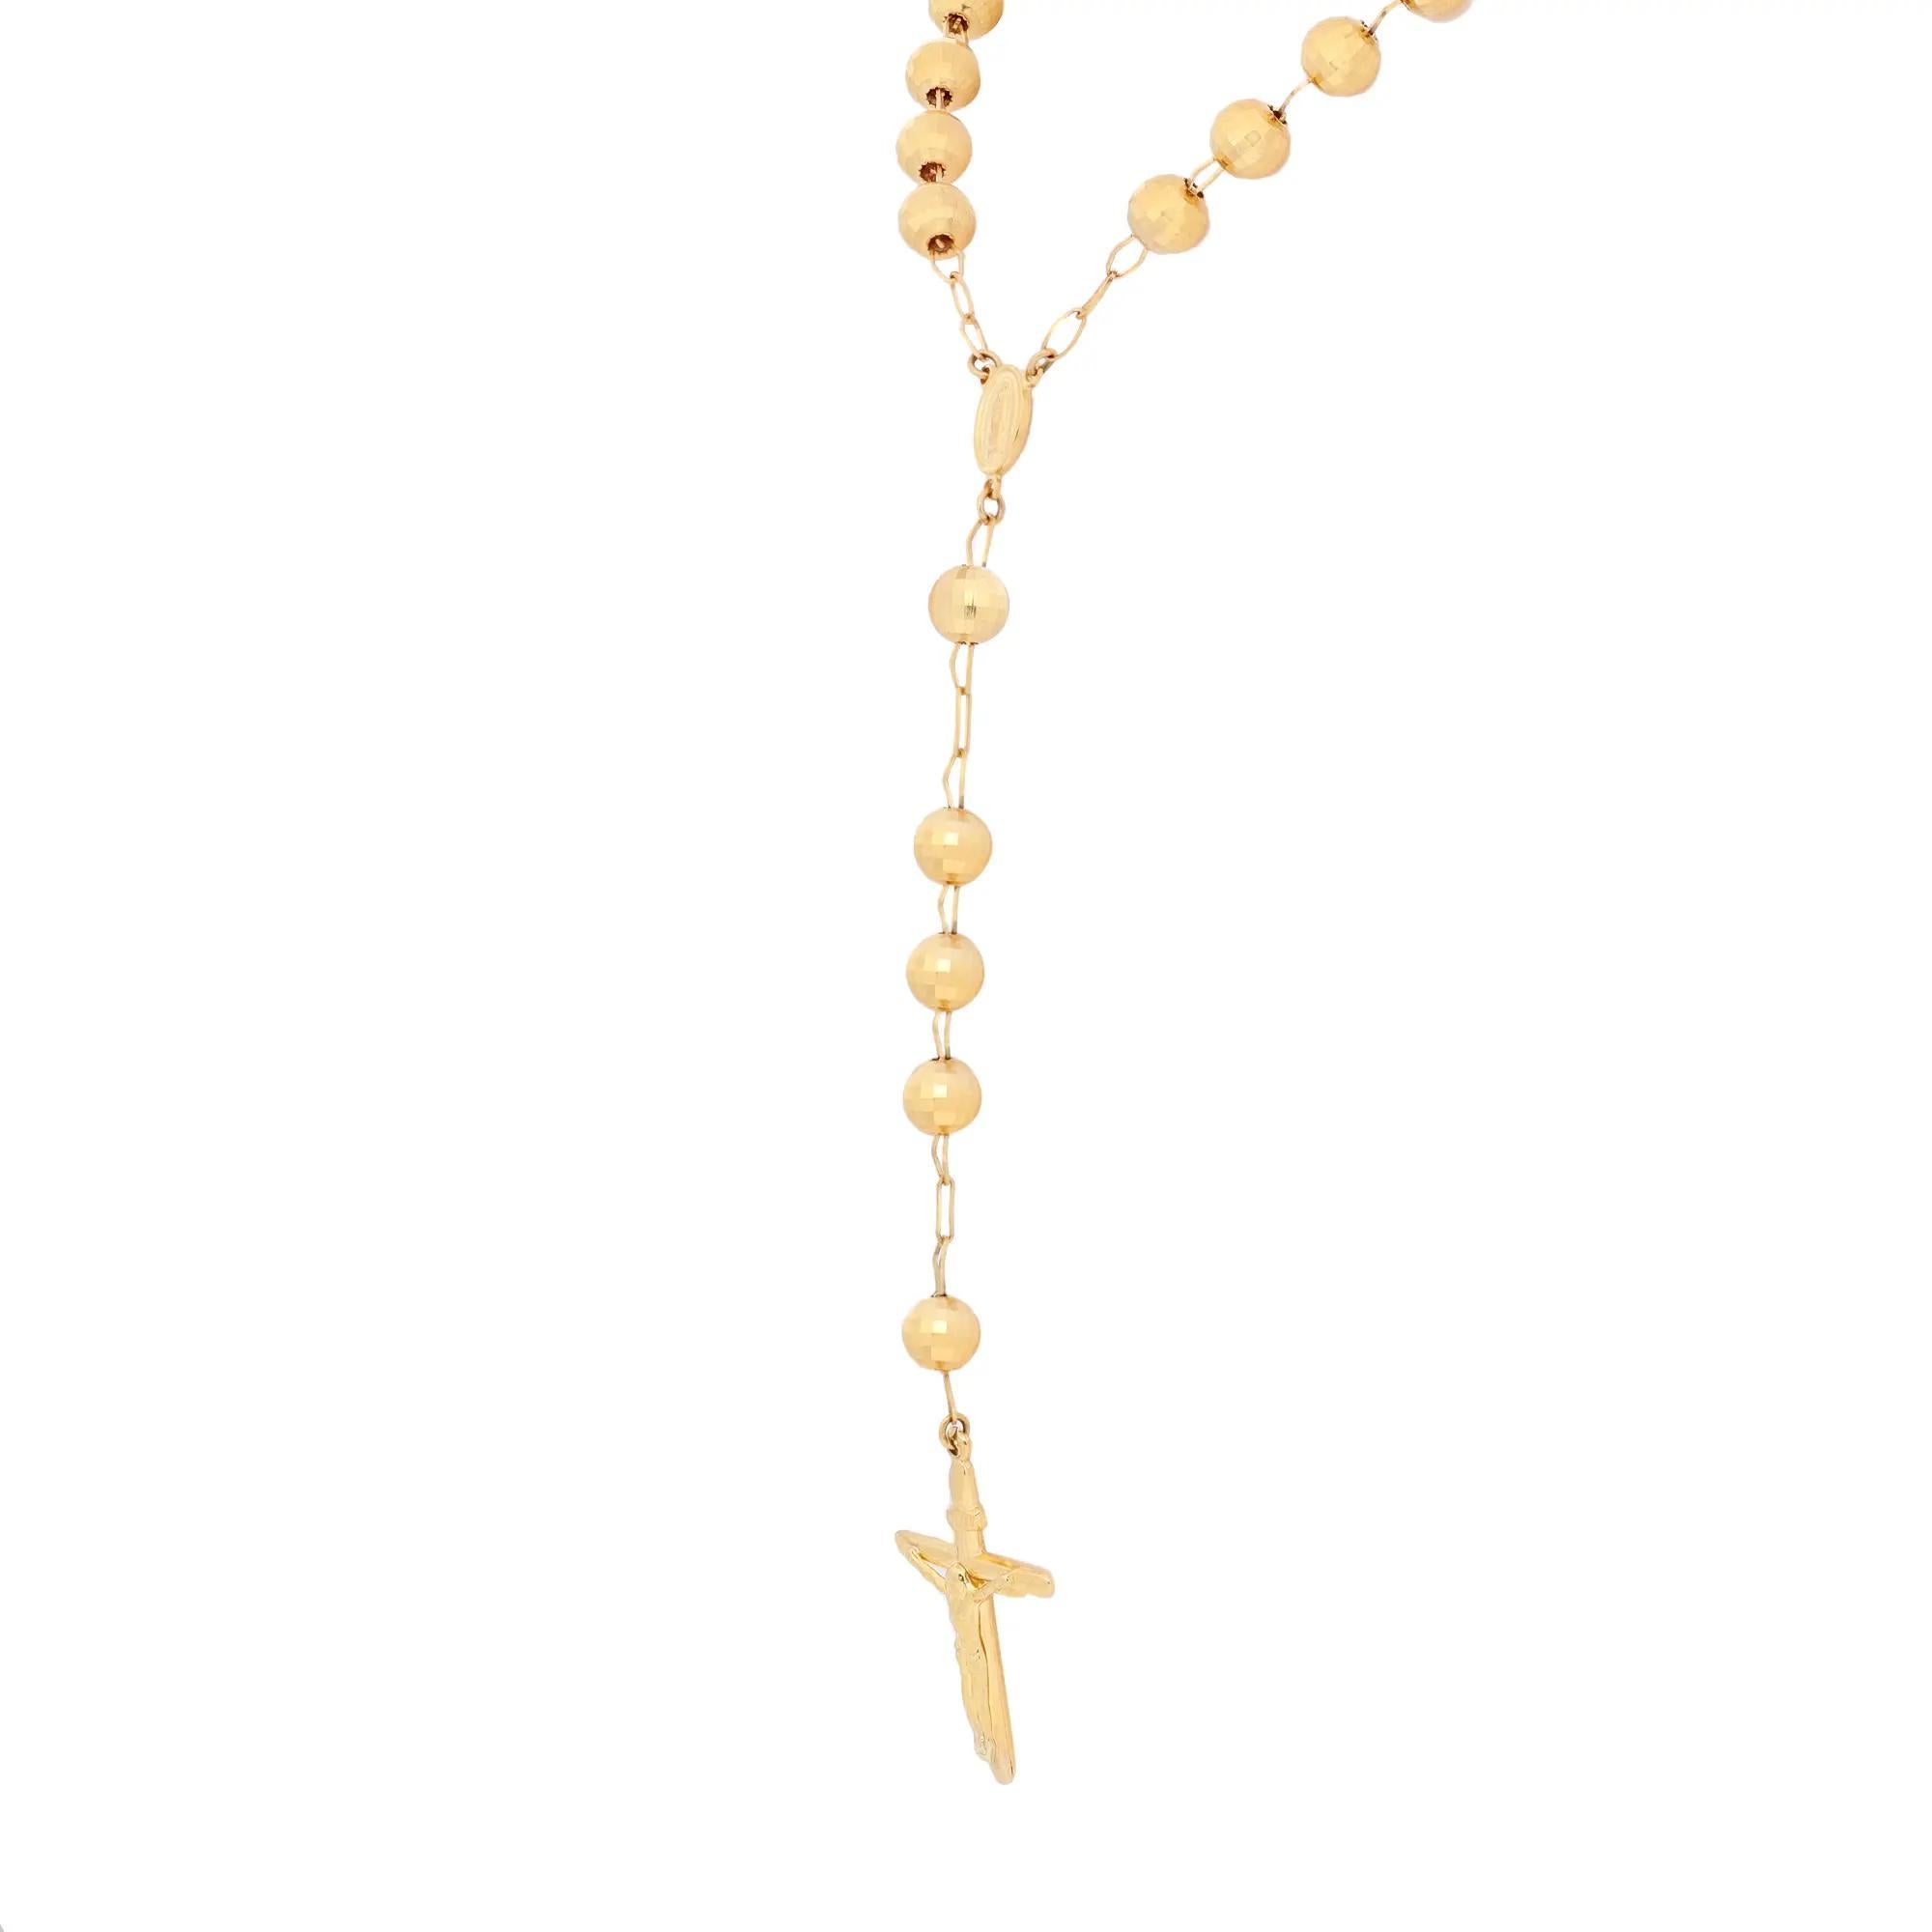 A bold statement of faith, this rosary inspired beaded necklace features a medallion of the blessed virgin and a powerful cross. Crafted in lustrous 14K yellow gold. Chain length: 30 inches. Cross size: 1.5 inches x 1inch. Total weight: 36.30 grams.